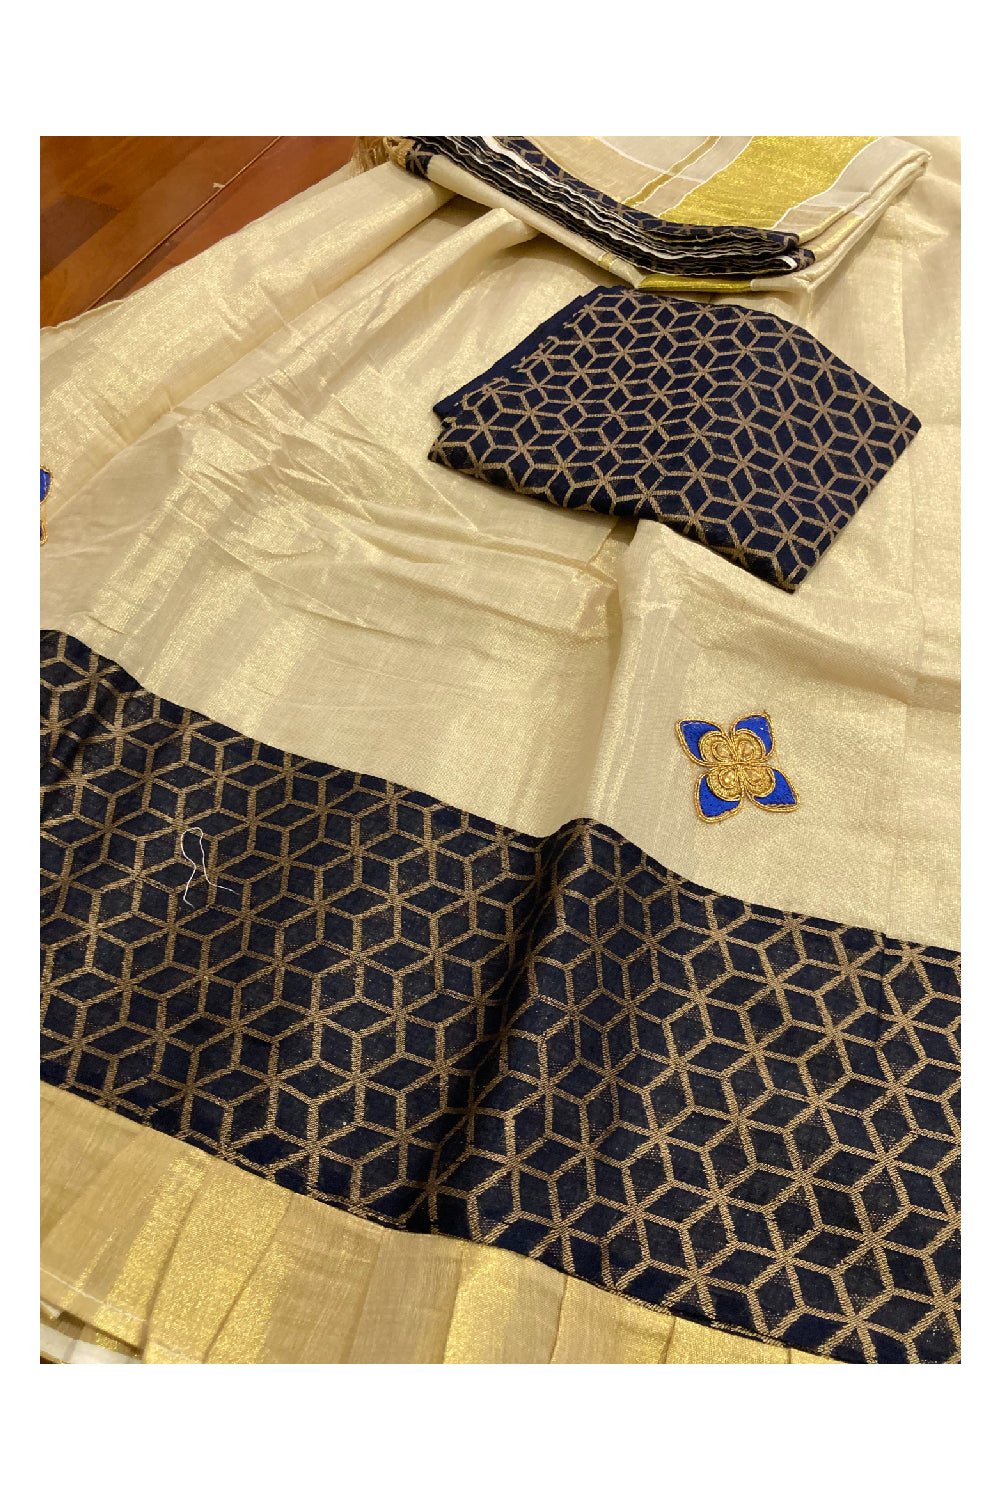 Kerala Tissue Stitched Dhavani Set with Blouse Piece and Neriyathu in with Dark Blue Accents